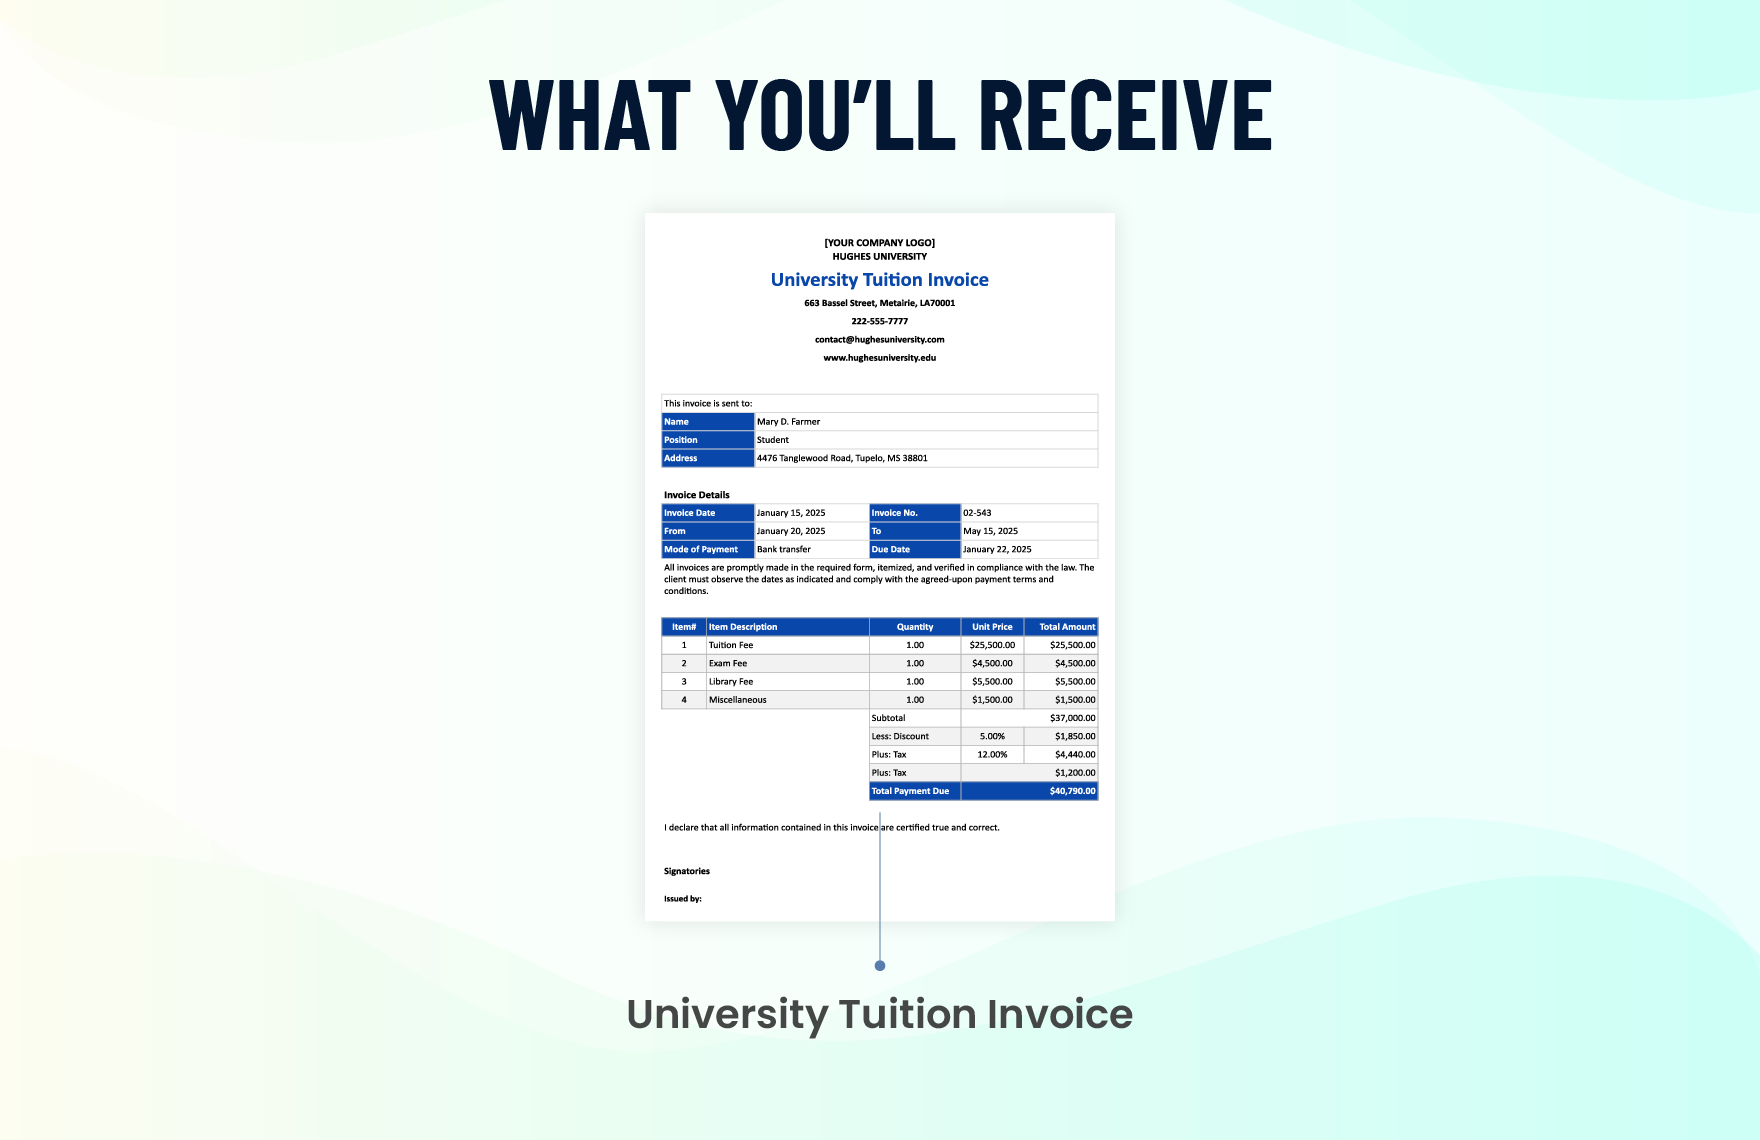 University Tuition Invoice Template